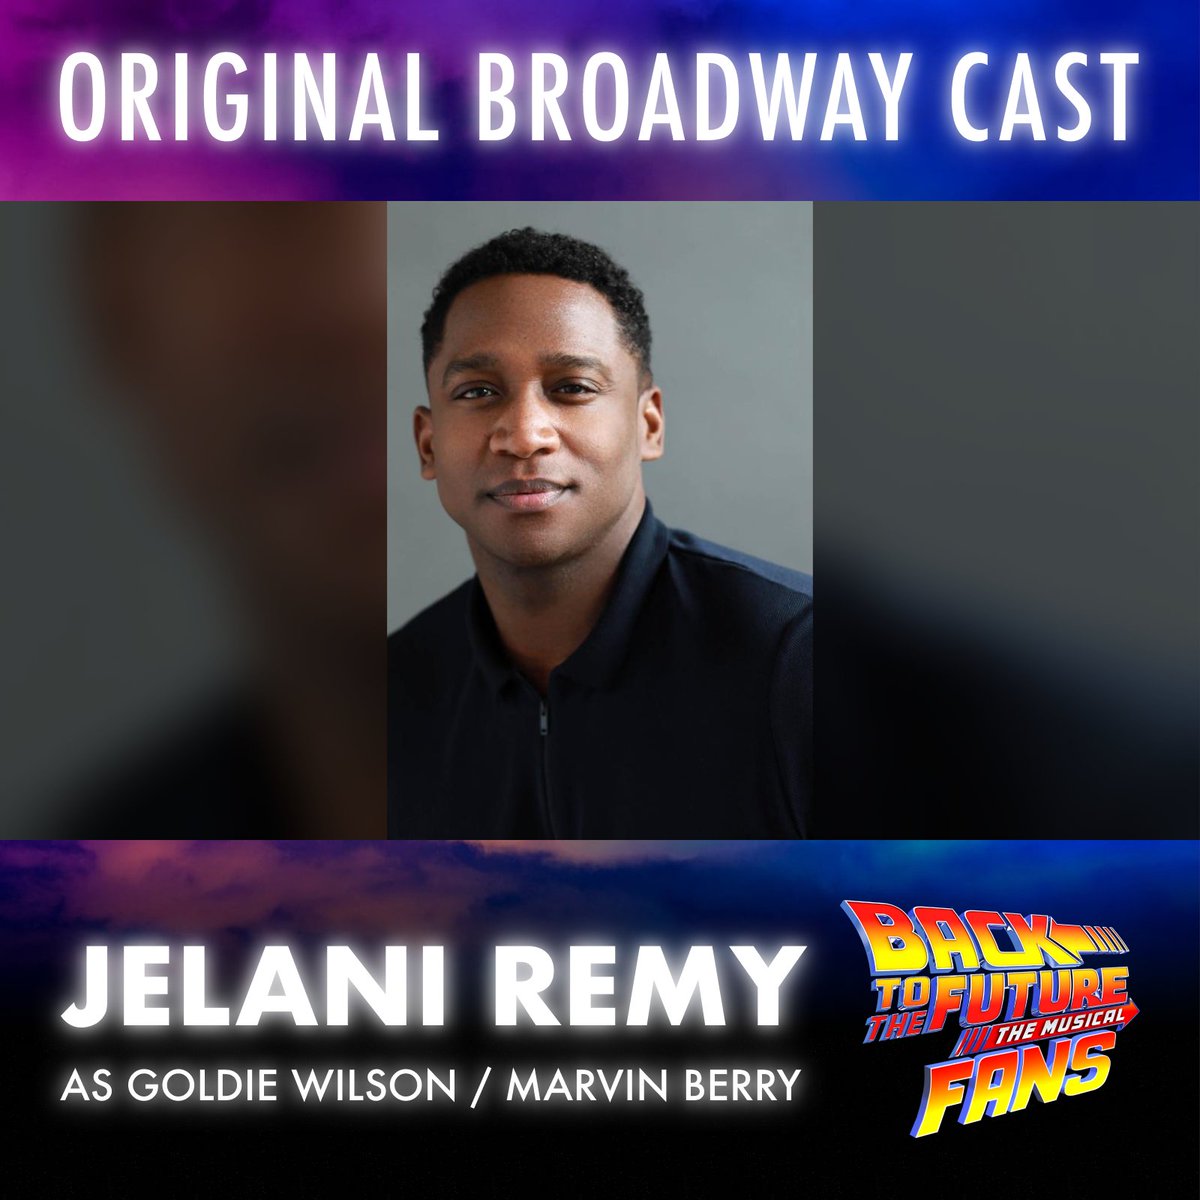 ⚡️ Jelani Remy as #GoldieWilson / #MarvinBerry

🎟 Get your tickets at backtothefuturemusical.com/new-york/

#bttfbwayfans #bttfbway #bttfbroadway #backtothefuturebroadway #bttfmusicalfans #bttfmusical #backtothefuturemusical #bttf #broadway #originalbroadwaycast #obc